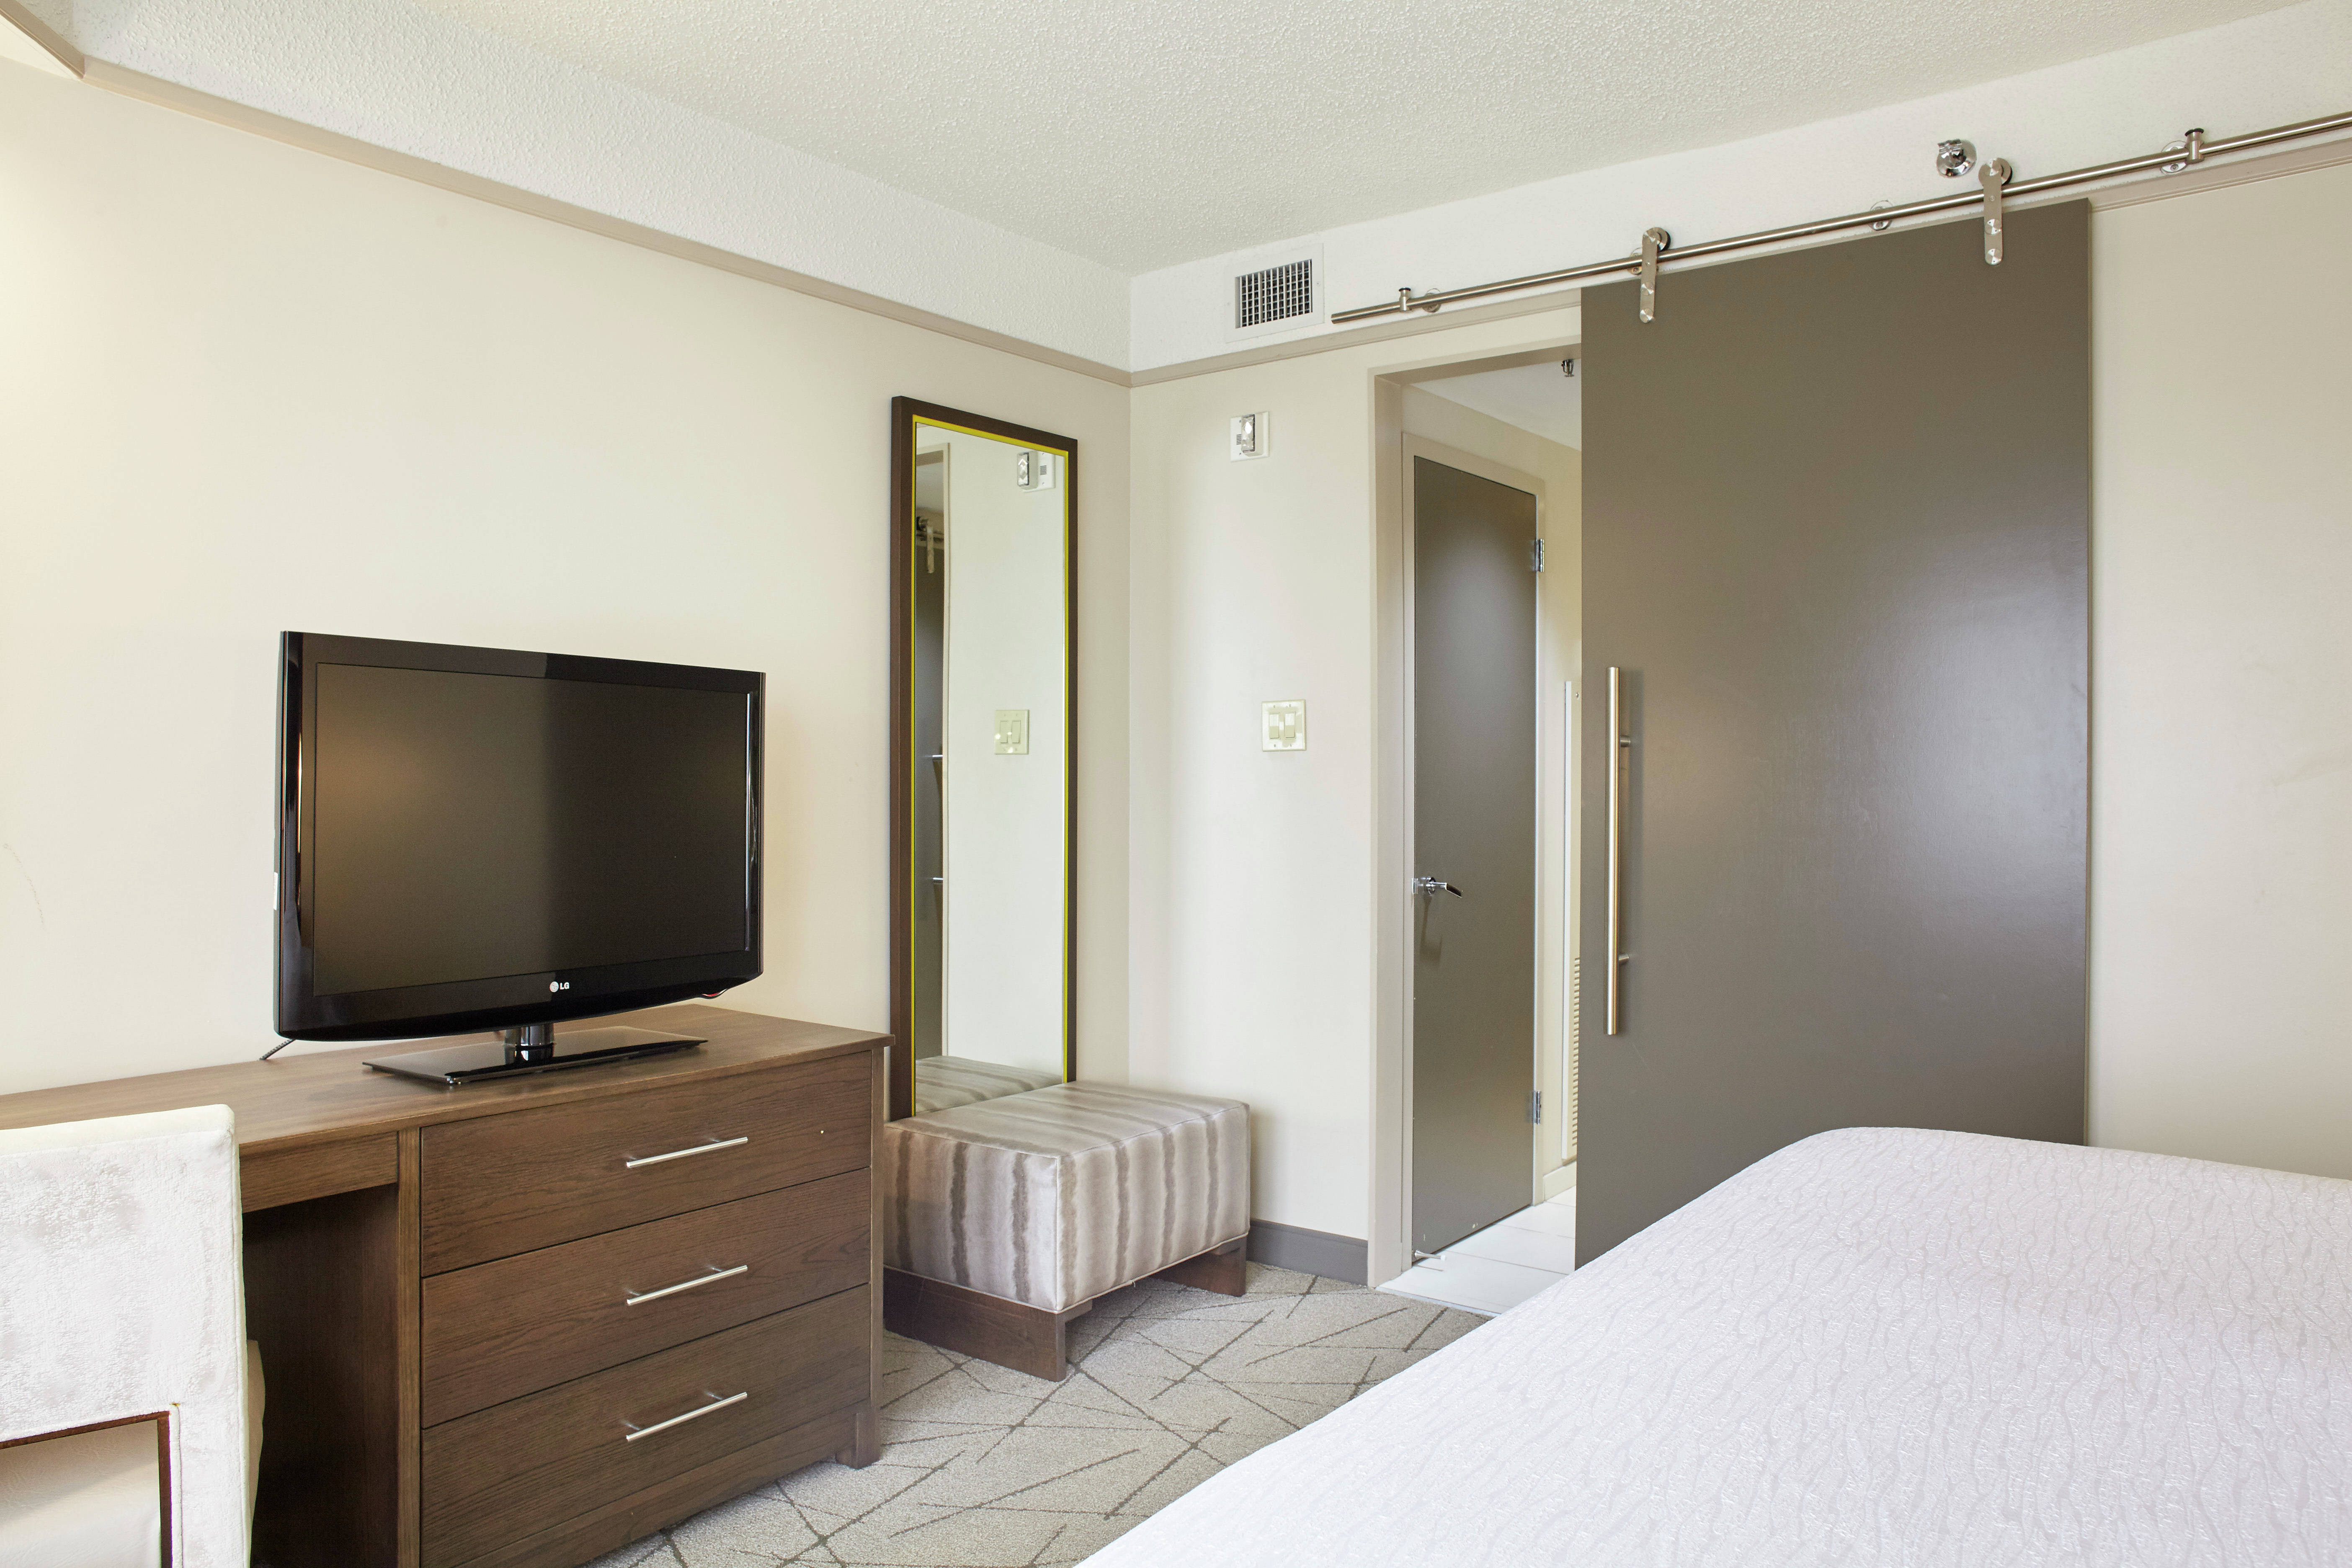 Hearing Accessible King Guestroom